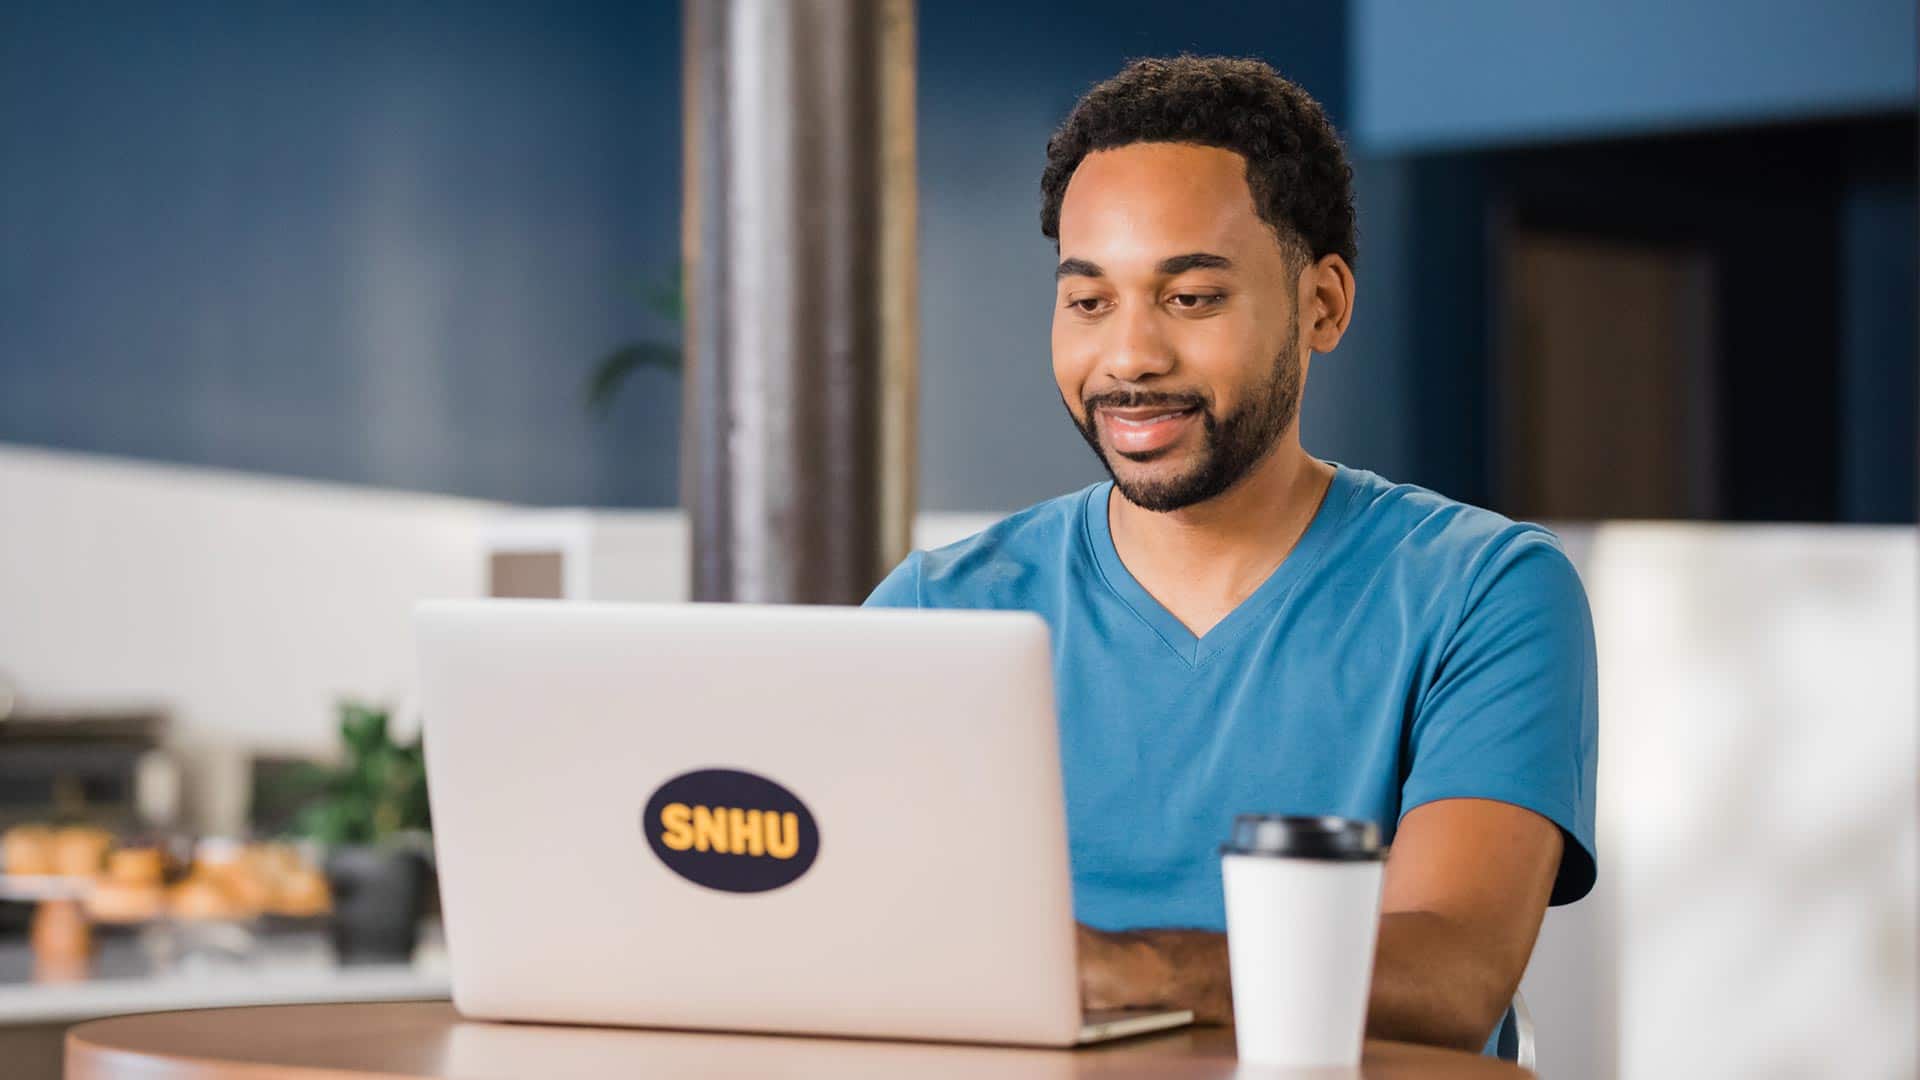 Gary Walker, who earned his degree from SNHU in 2022, sitting in a coffee shop working on his laptop that has an SNHU sticker on the cover.